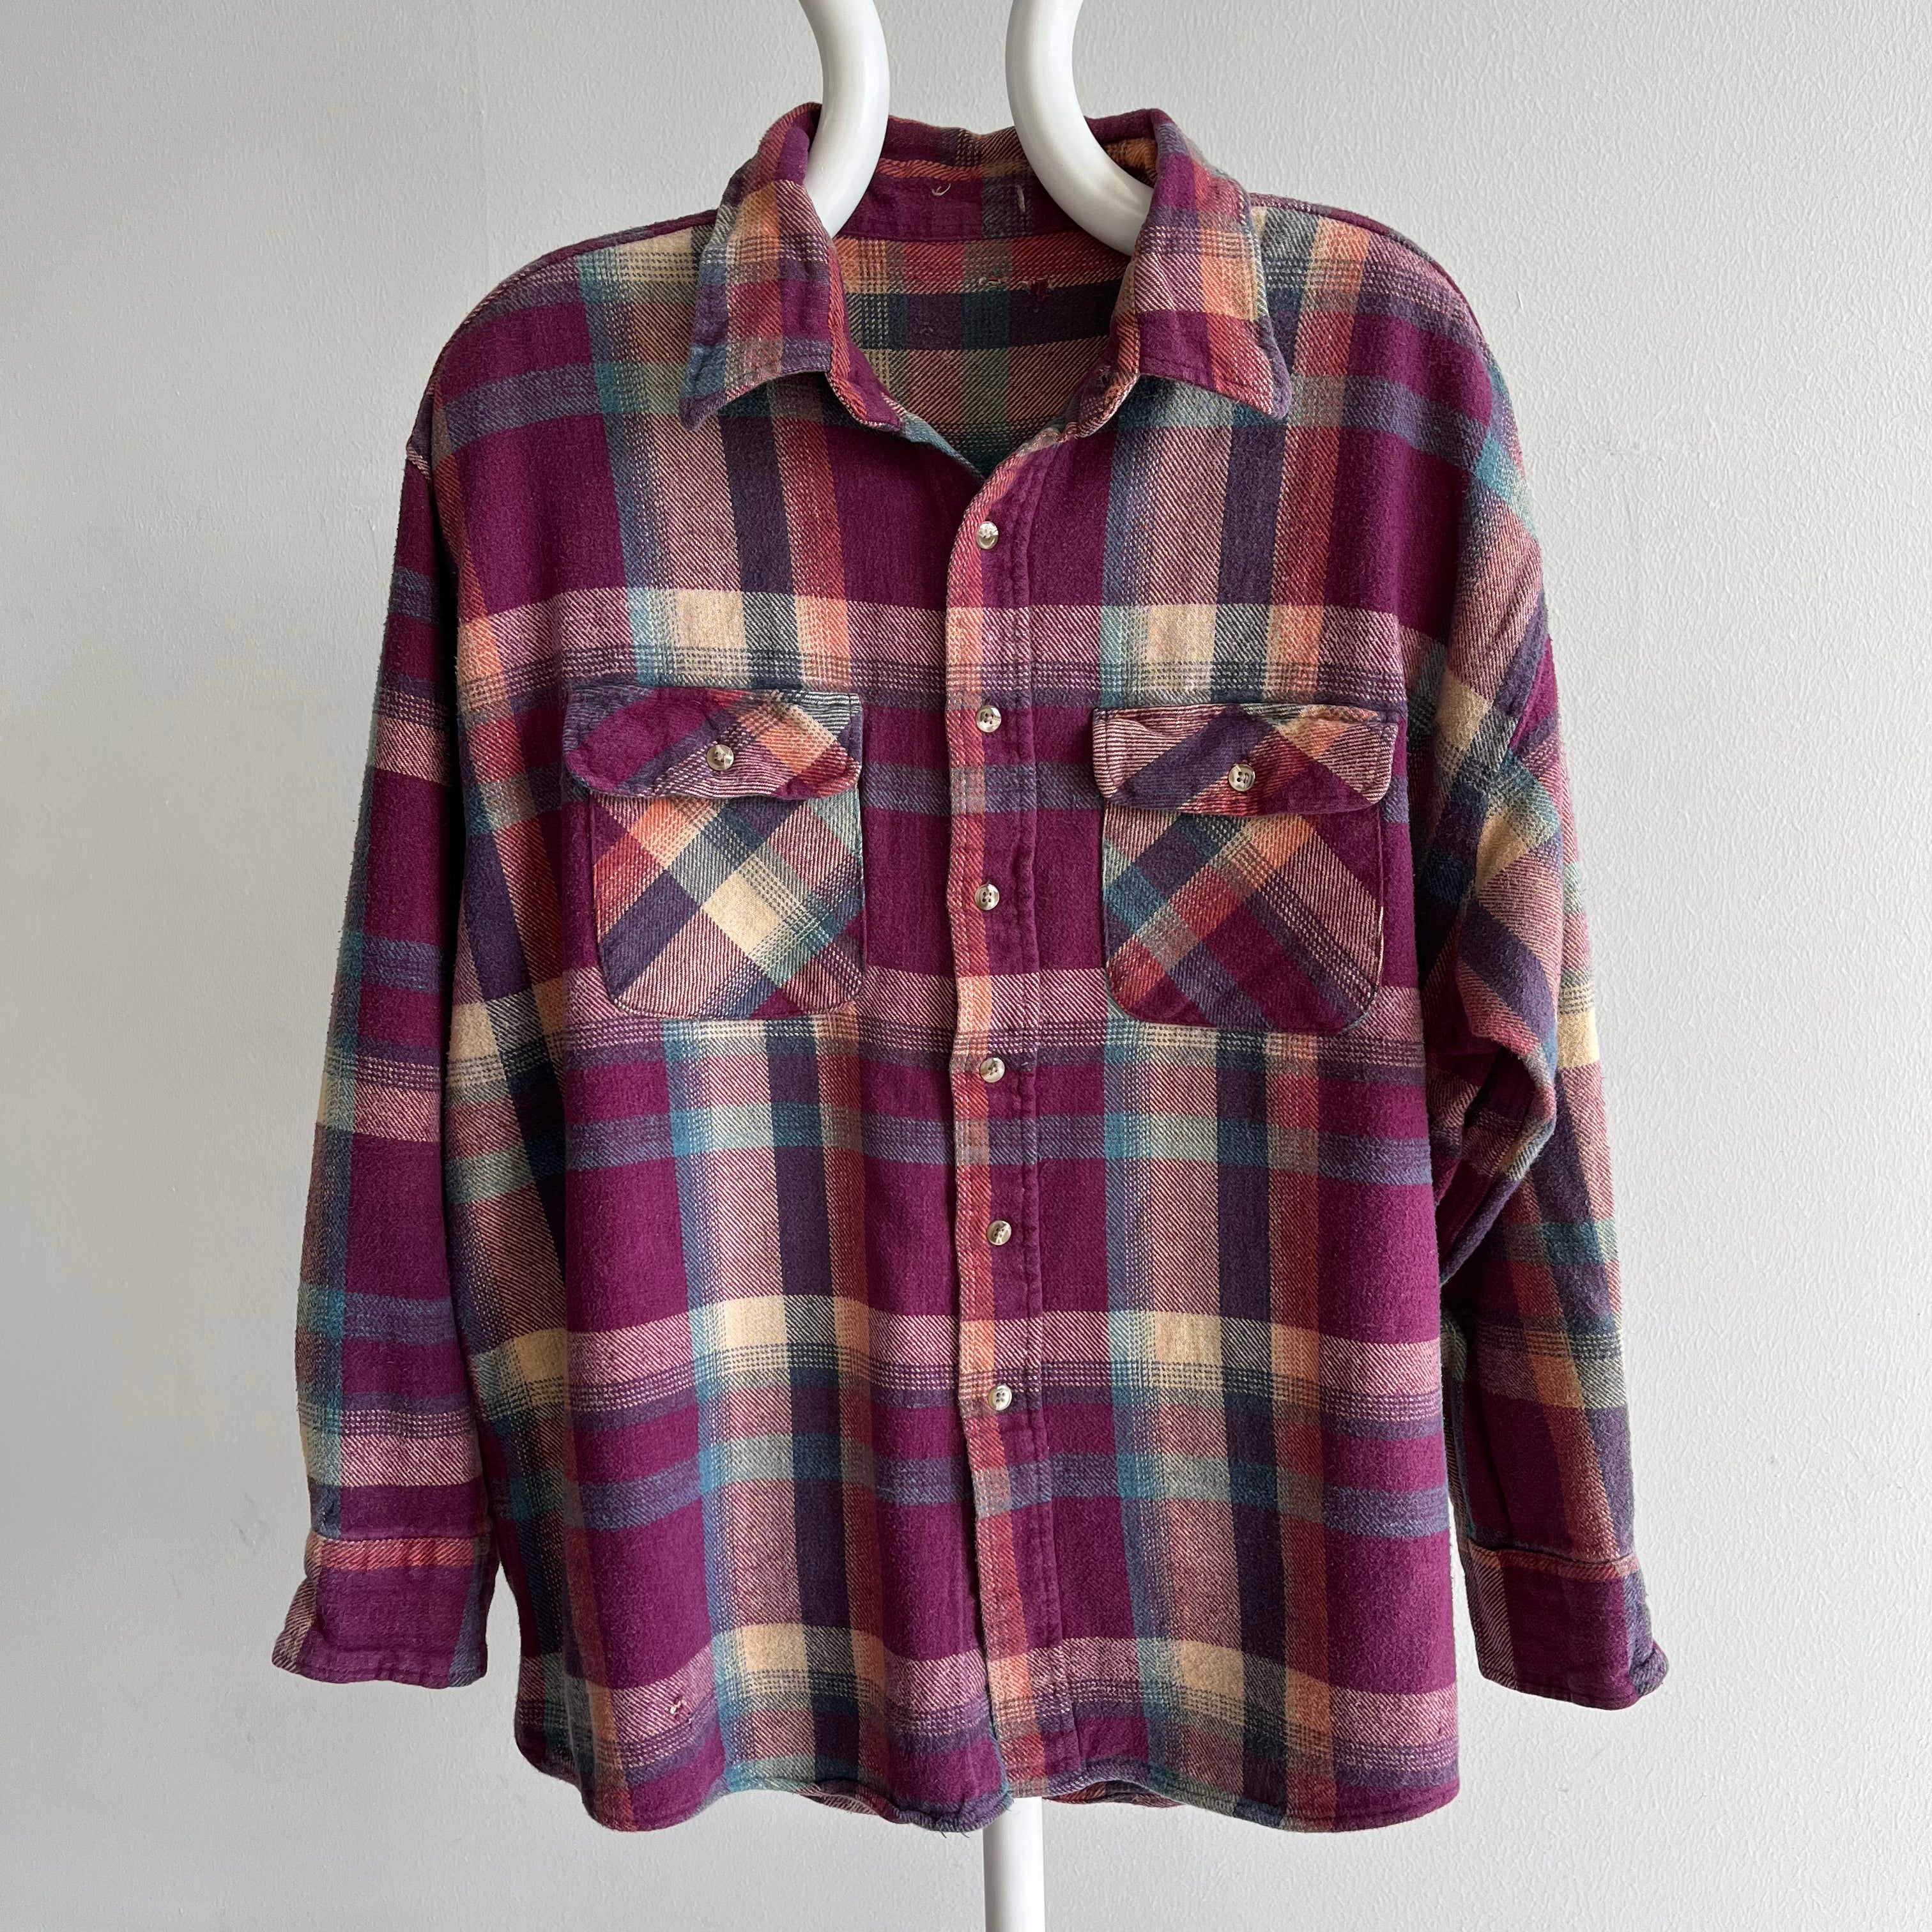 1990s/00s Magenta and Camel Slouchy Cotton Flannel